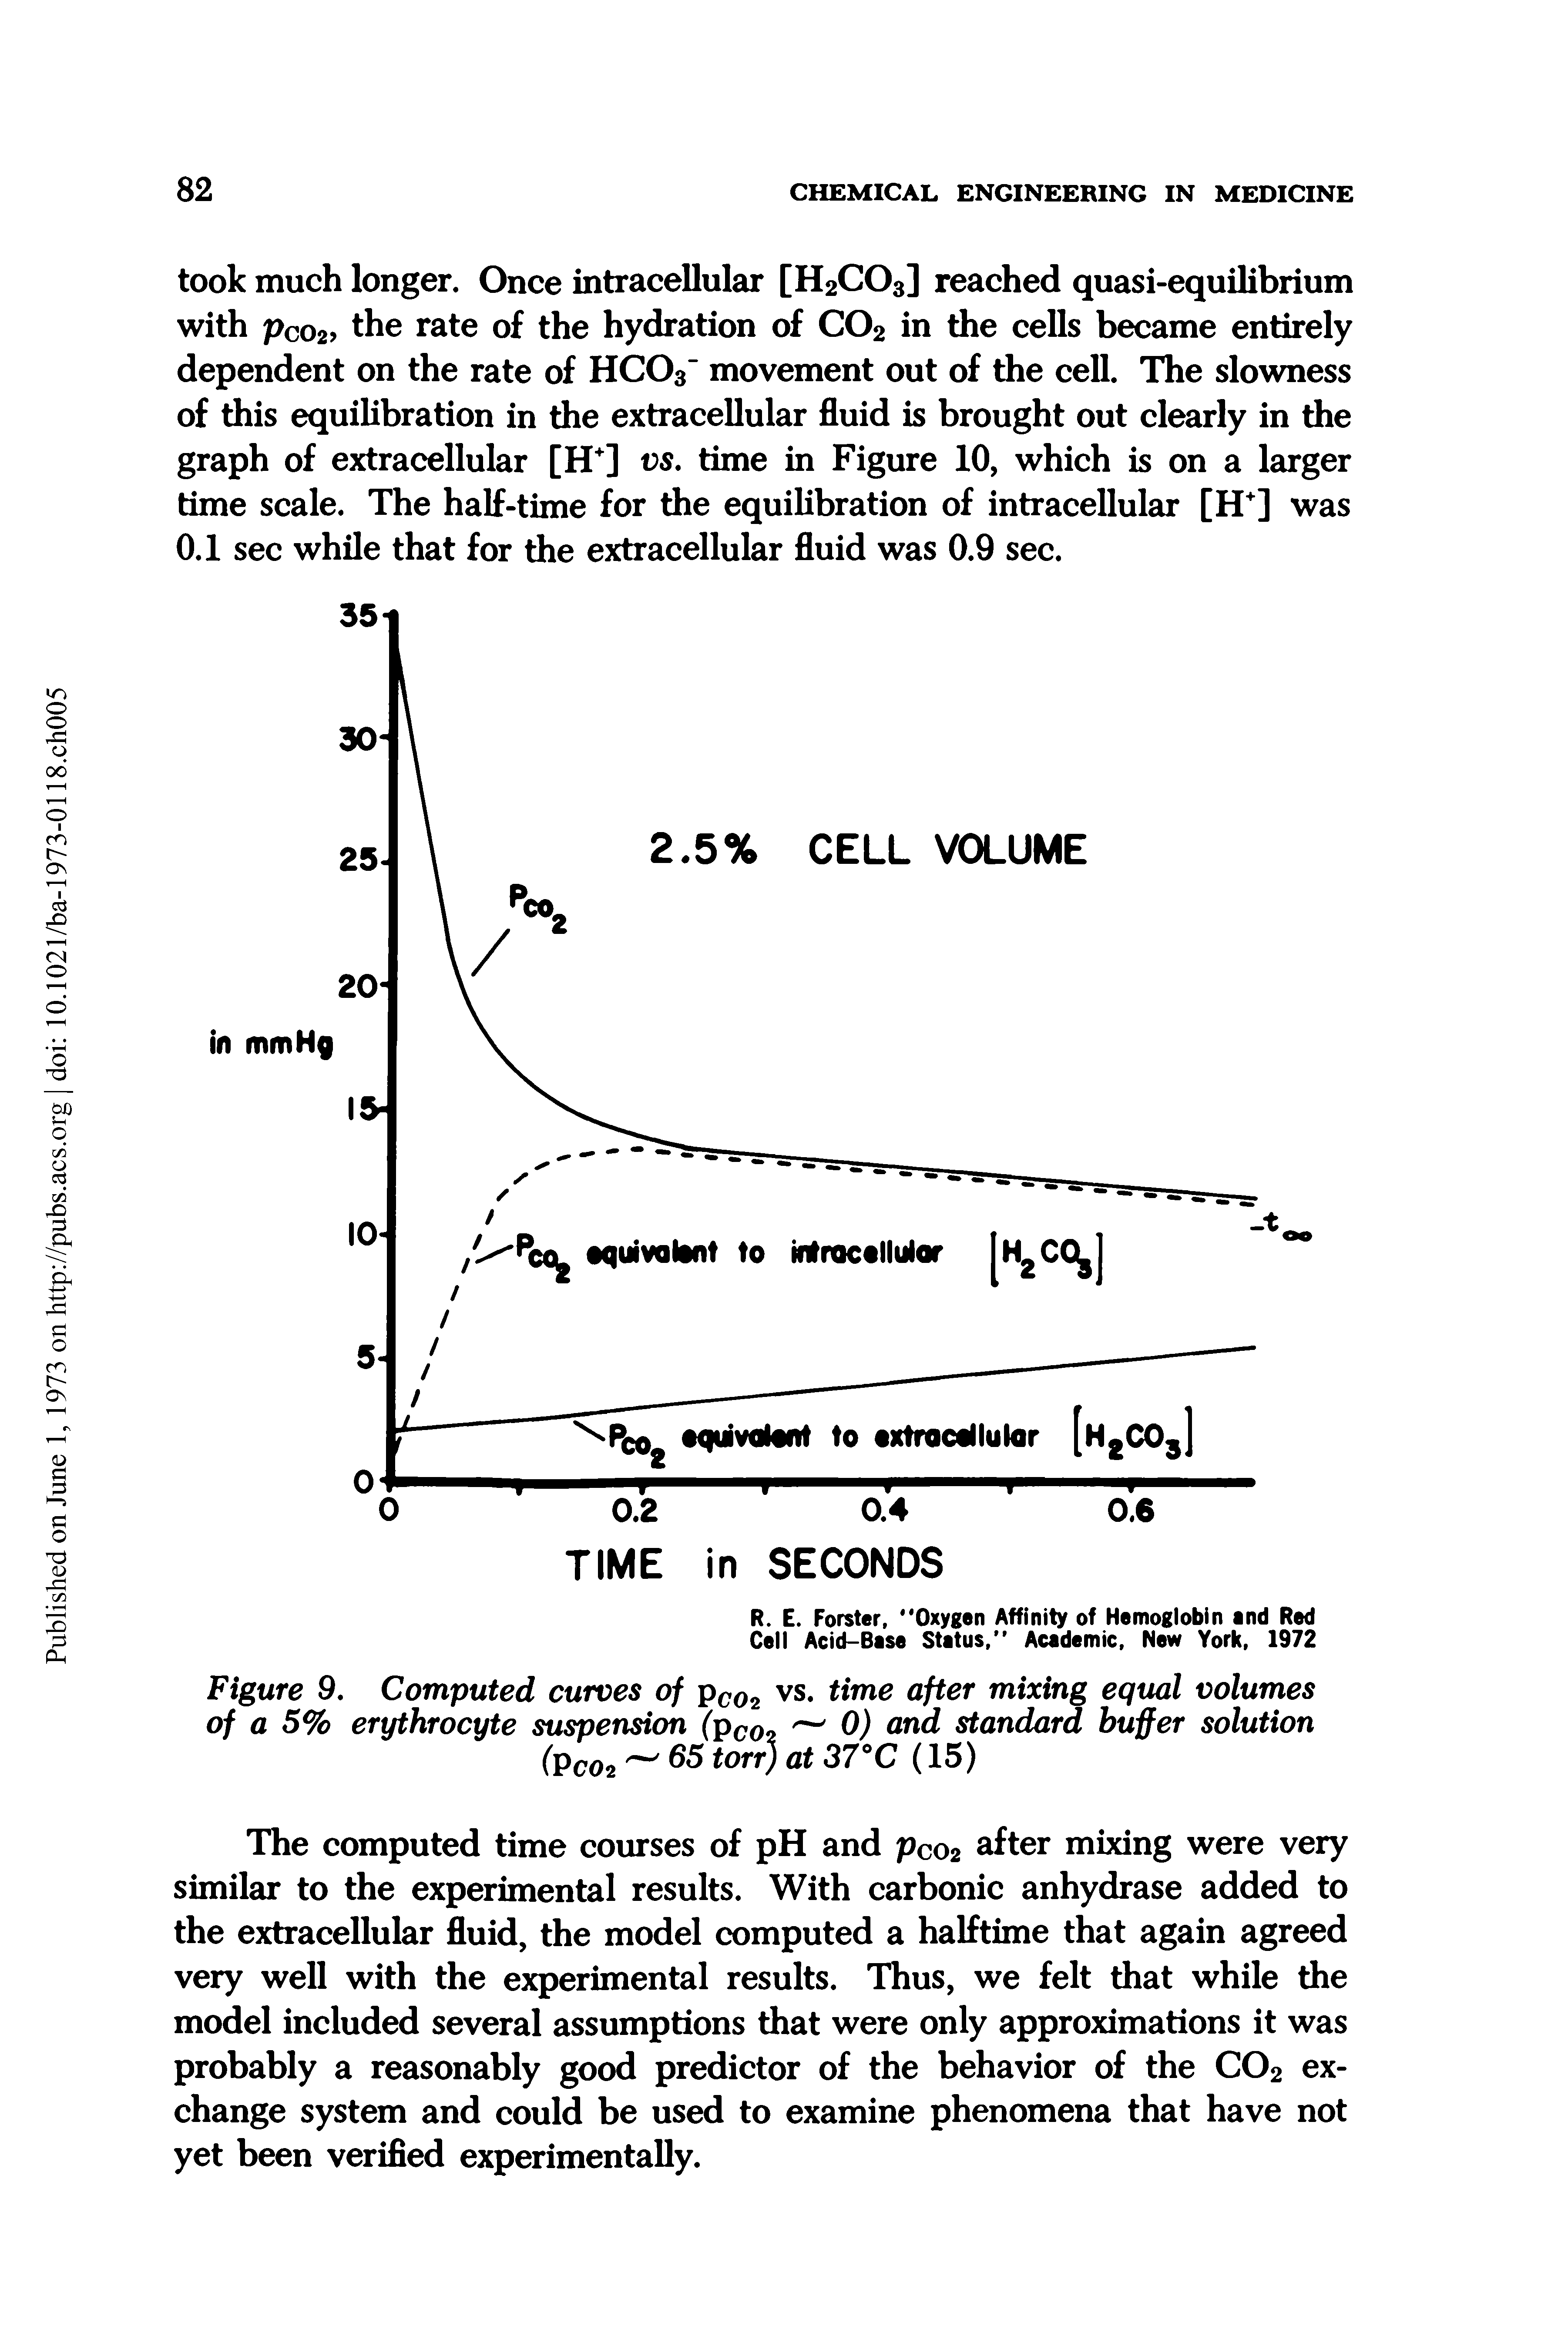 Figure 9. Computed curves of pC02 vs. time after mixing equal volumes of a 5% erythrocyte suspension (pco 0) and standard buffer solution (Pco2 65 torr) at 37°C (15)...